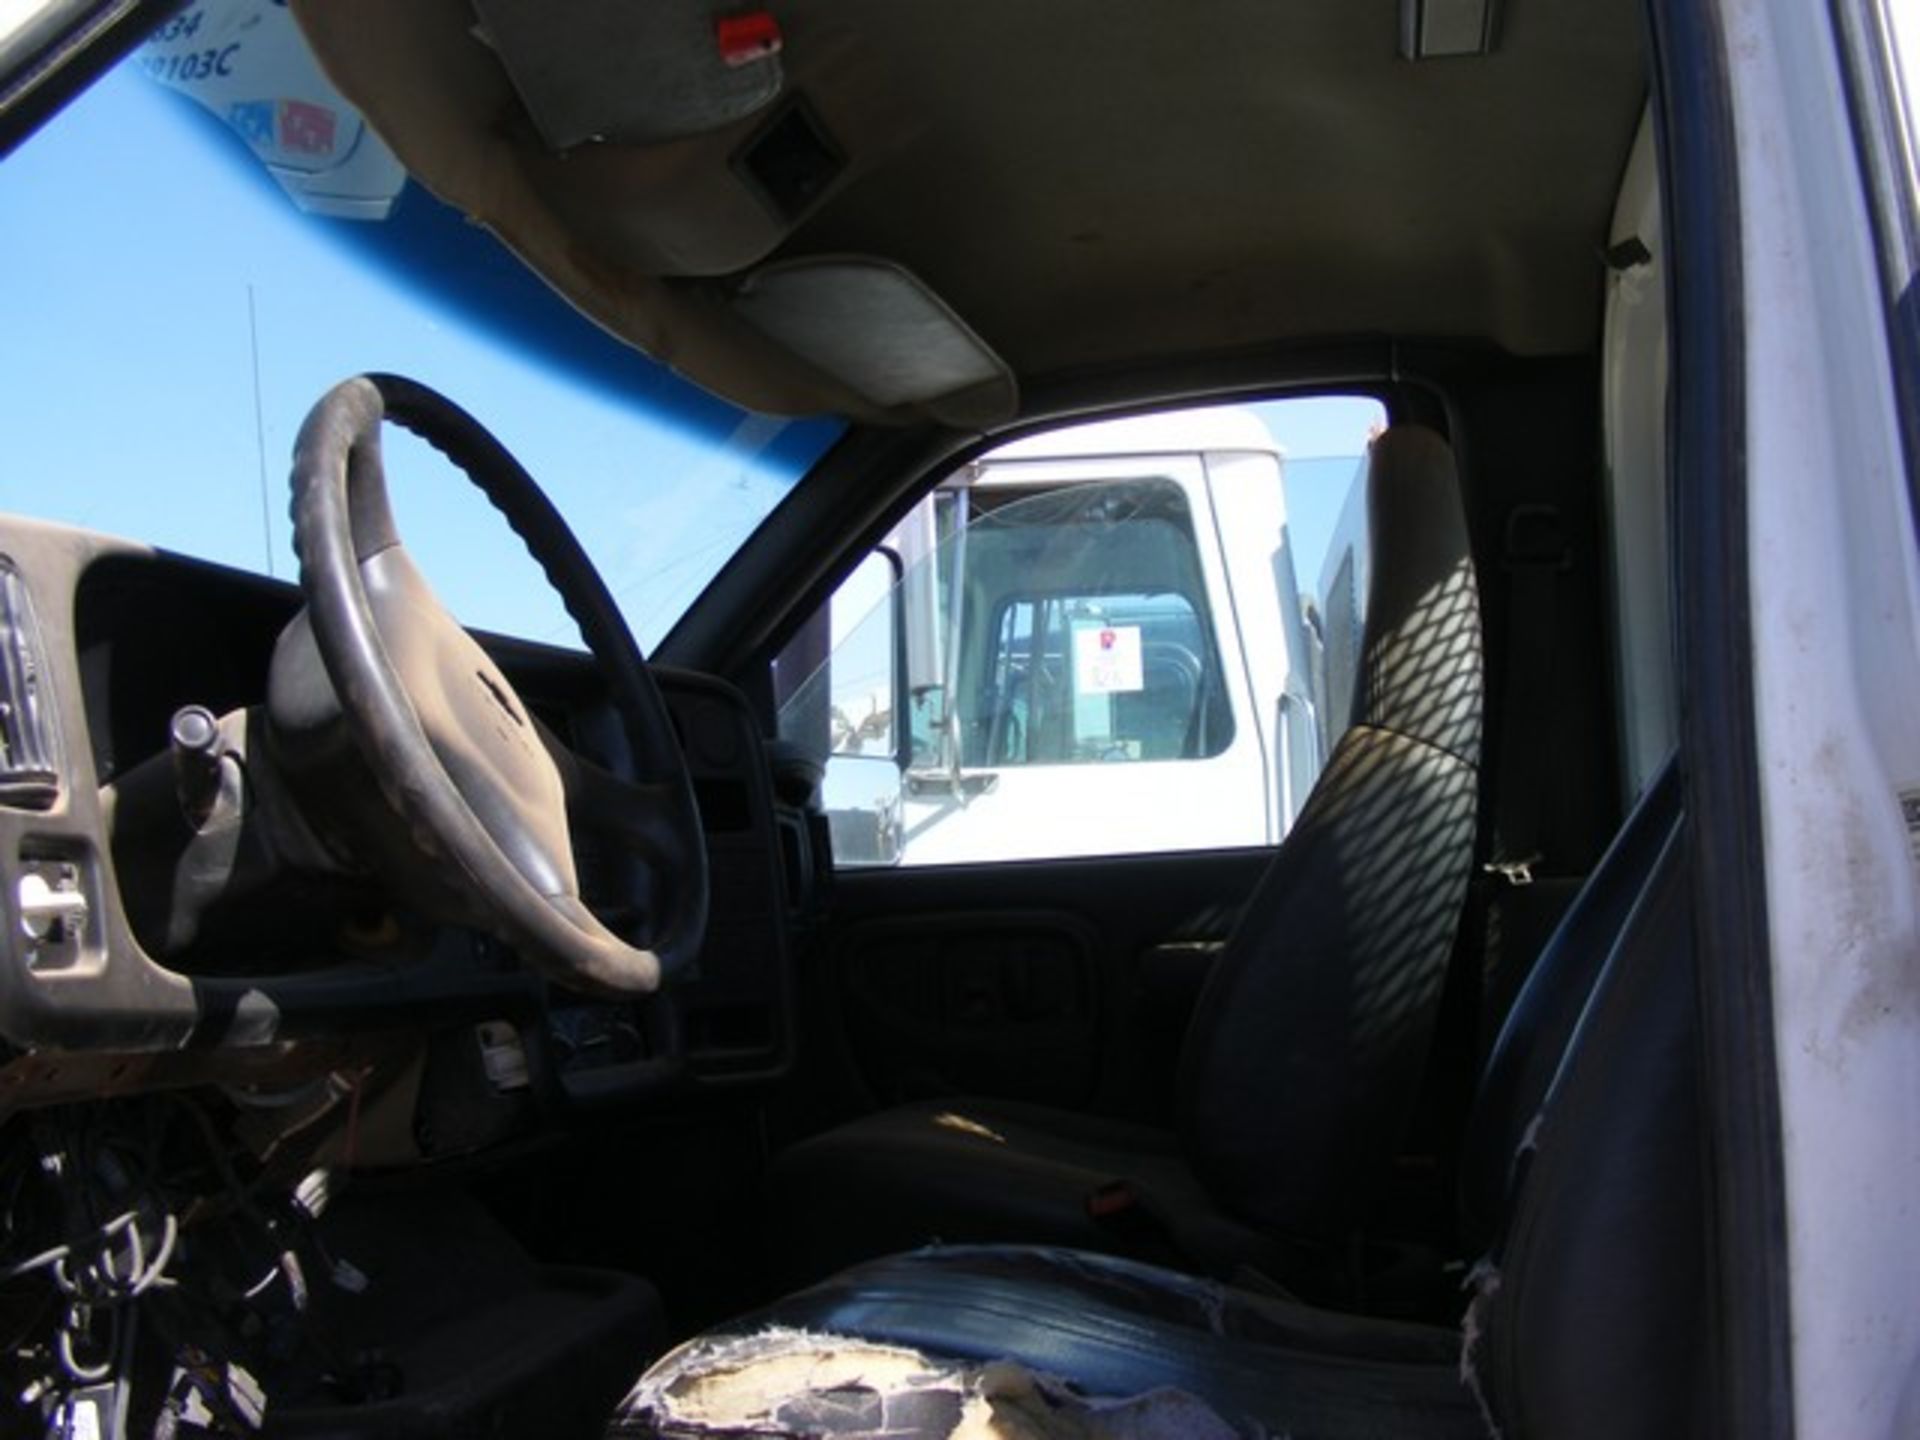 Located in YARD 1 - Midland, TX (2395) (X) 2006 CHEVROLET C7500 S/A DAY CAB STAKE BED TRUCK, VIN- - Image 6 of 10